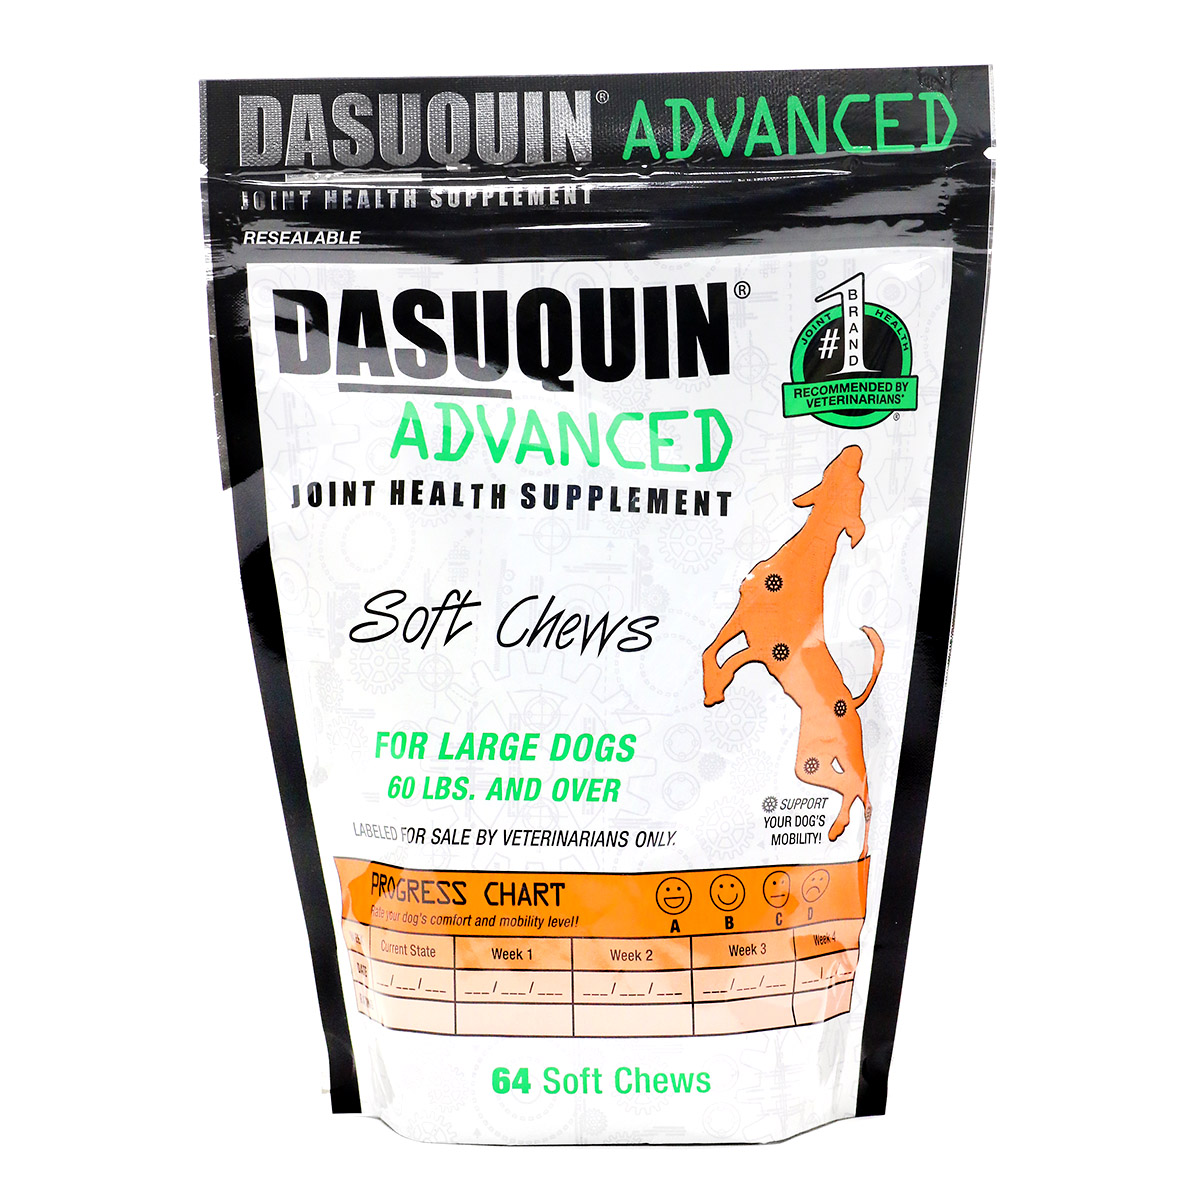 barr-north-veterinary-services-dasuquin-advanced-soft-chews-for-large-dogs-64s